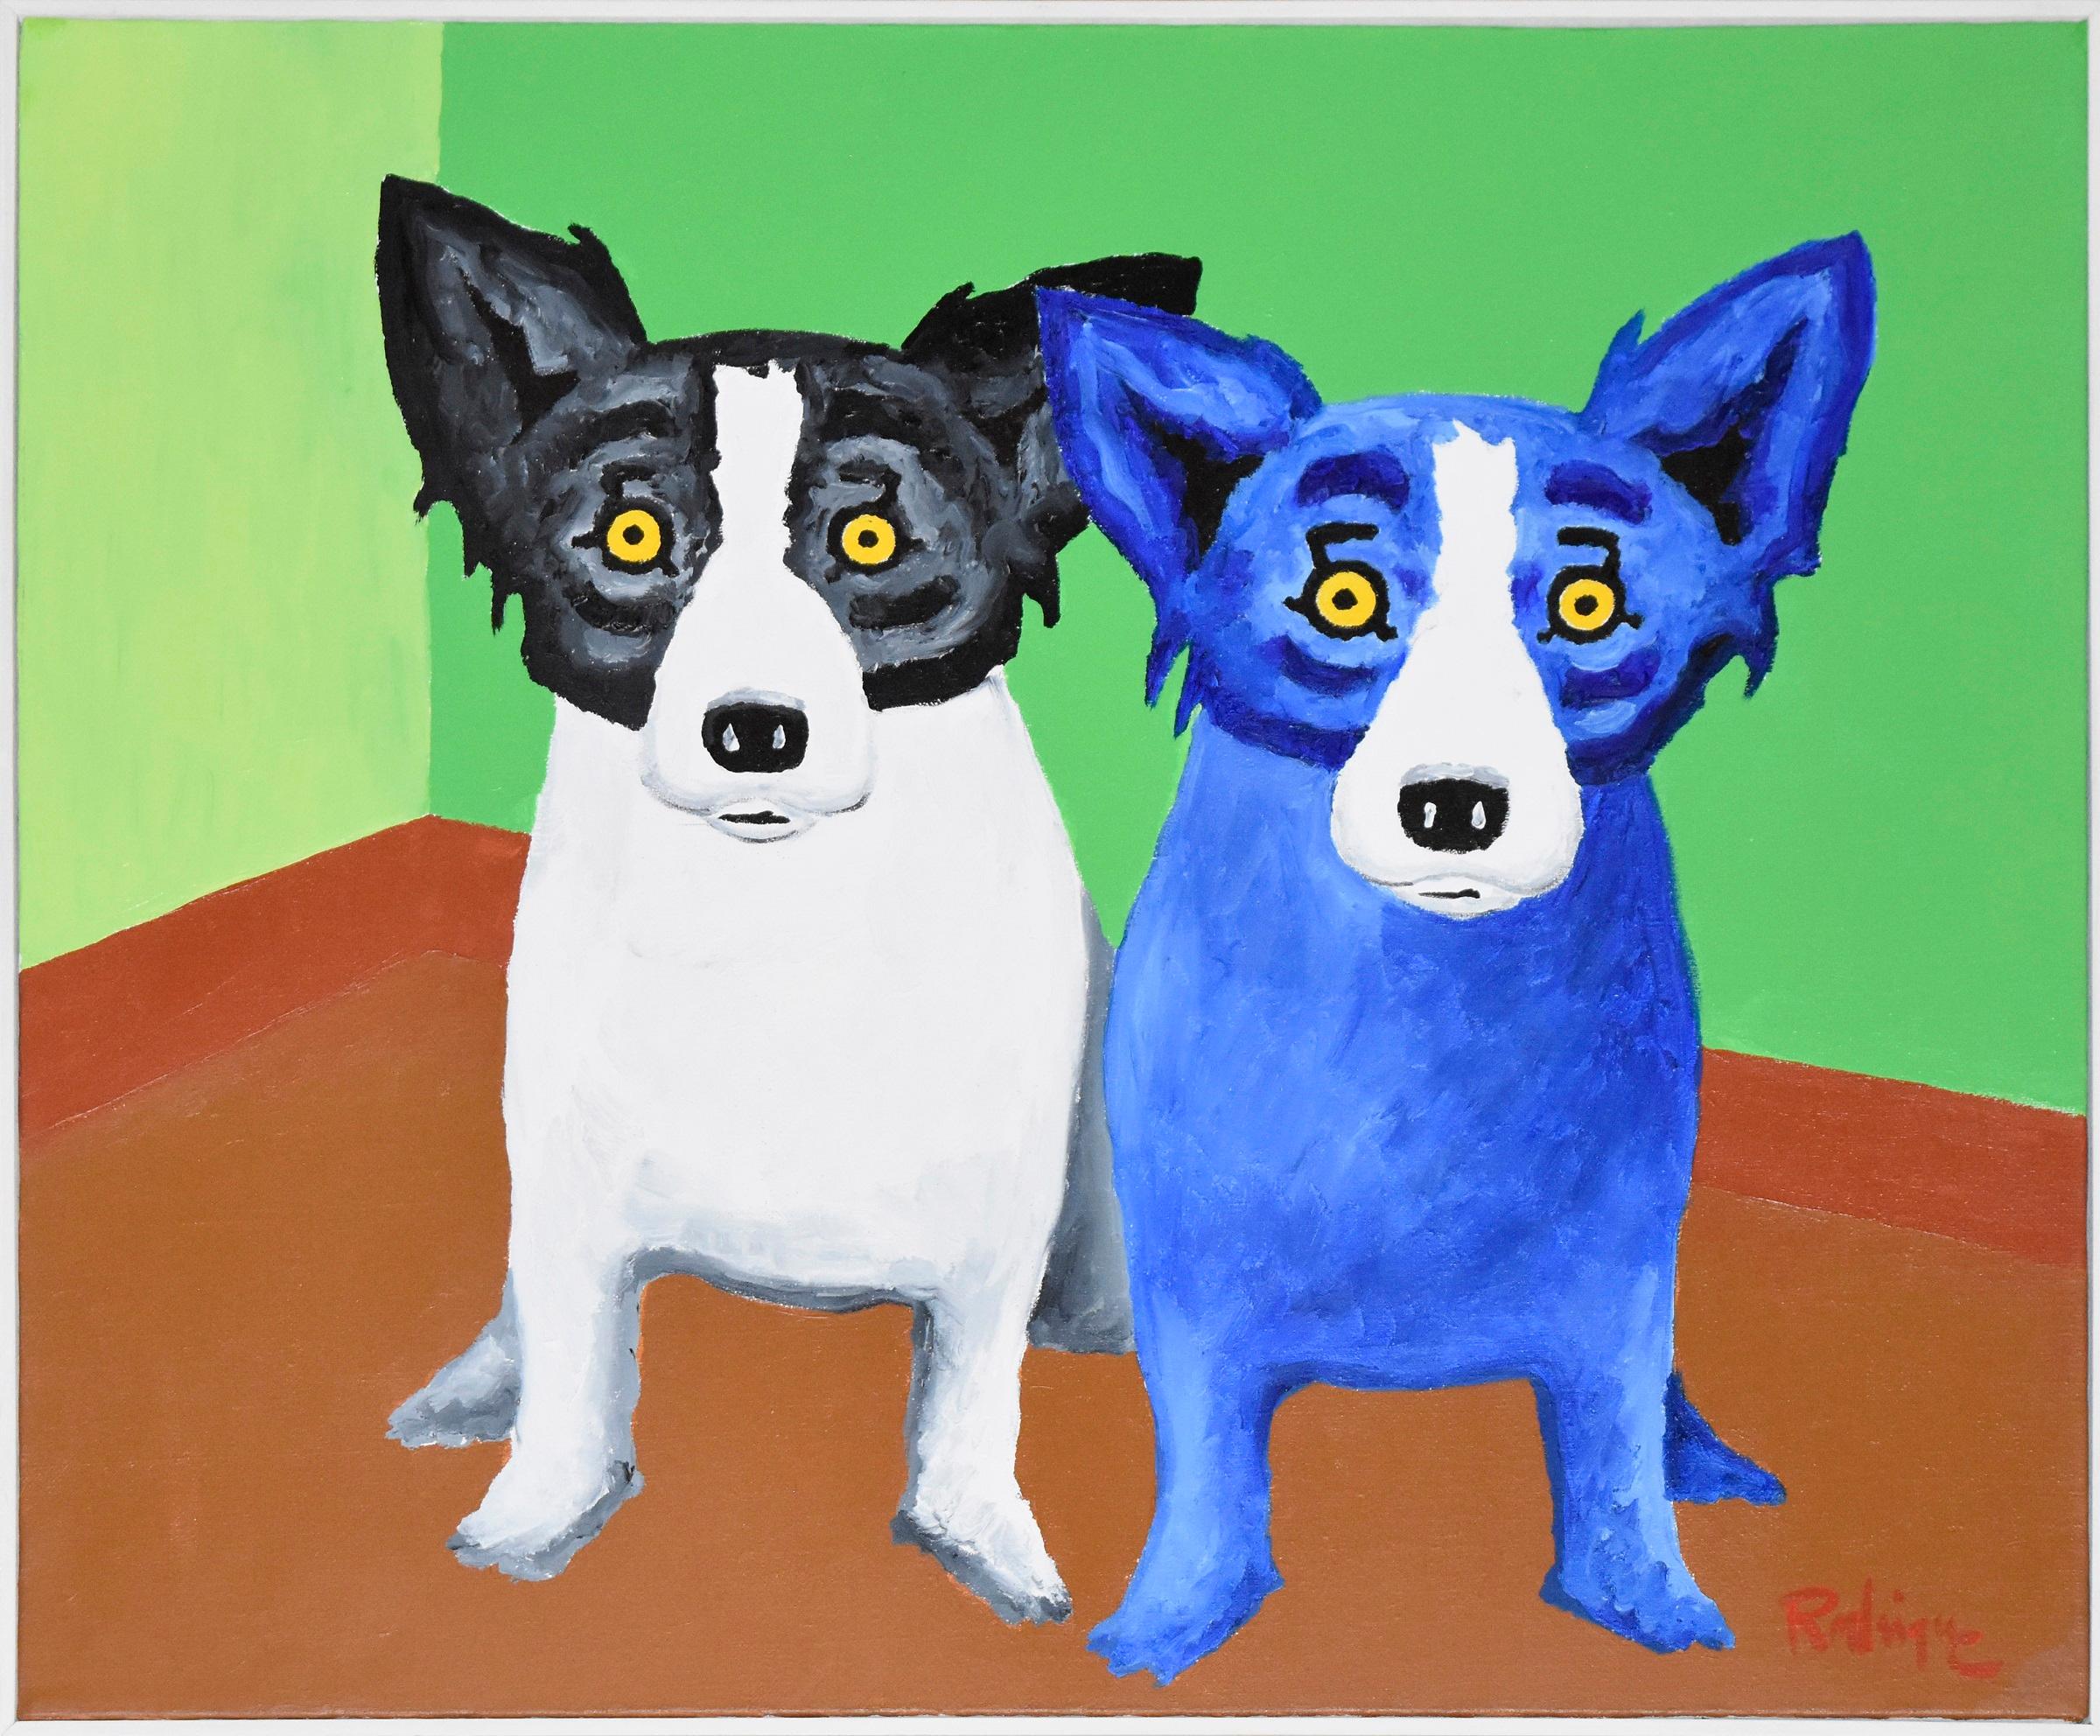 This Blue Dog work consists of a green and brown background  There are 2 dogs; 1 black and white and 1 blue.  Both animals have soulful yellow eyes.  This pop art animal original Oil on Canvas is hand signed by the artist.

Artist:  George